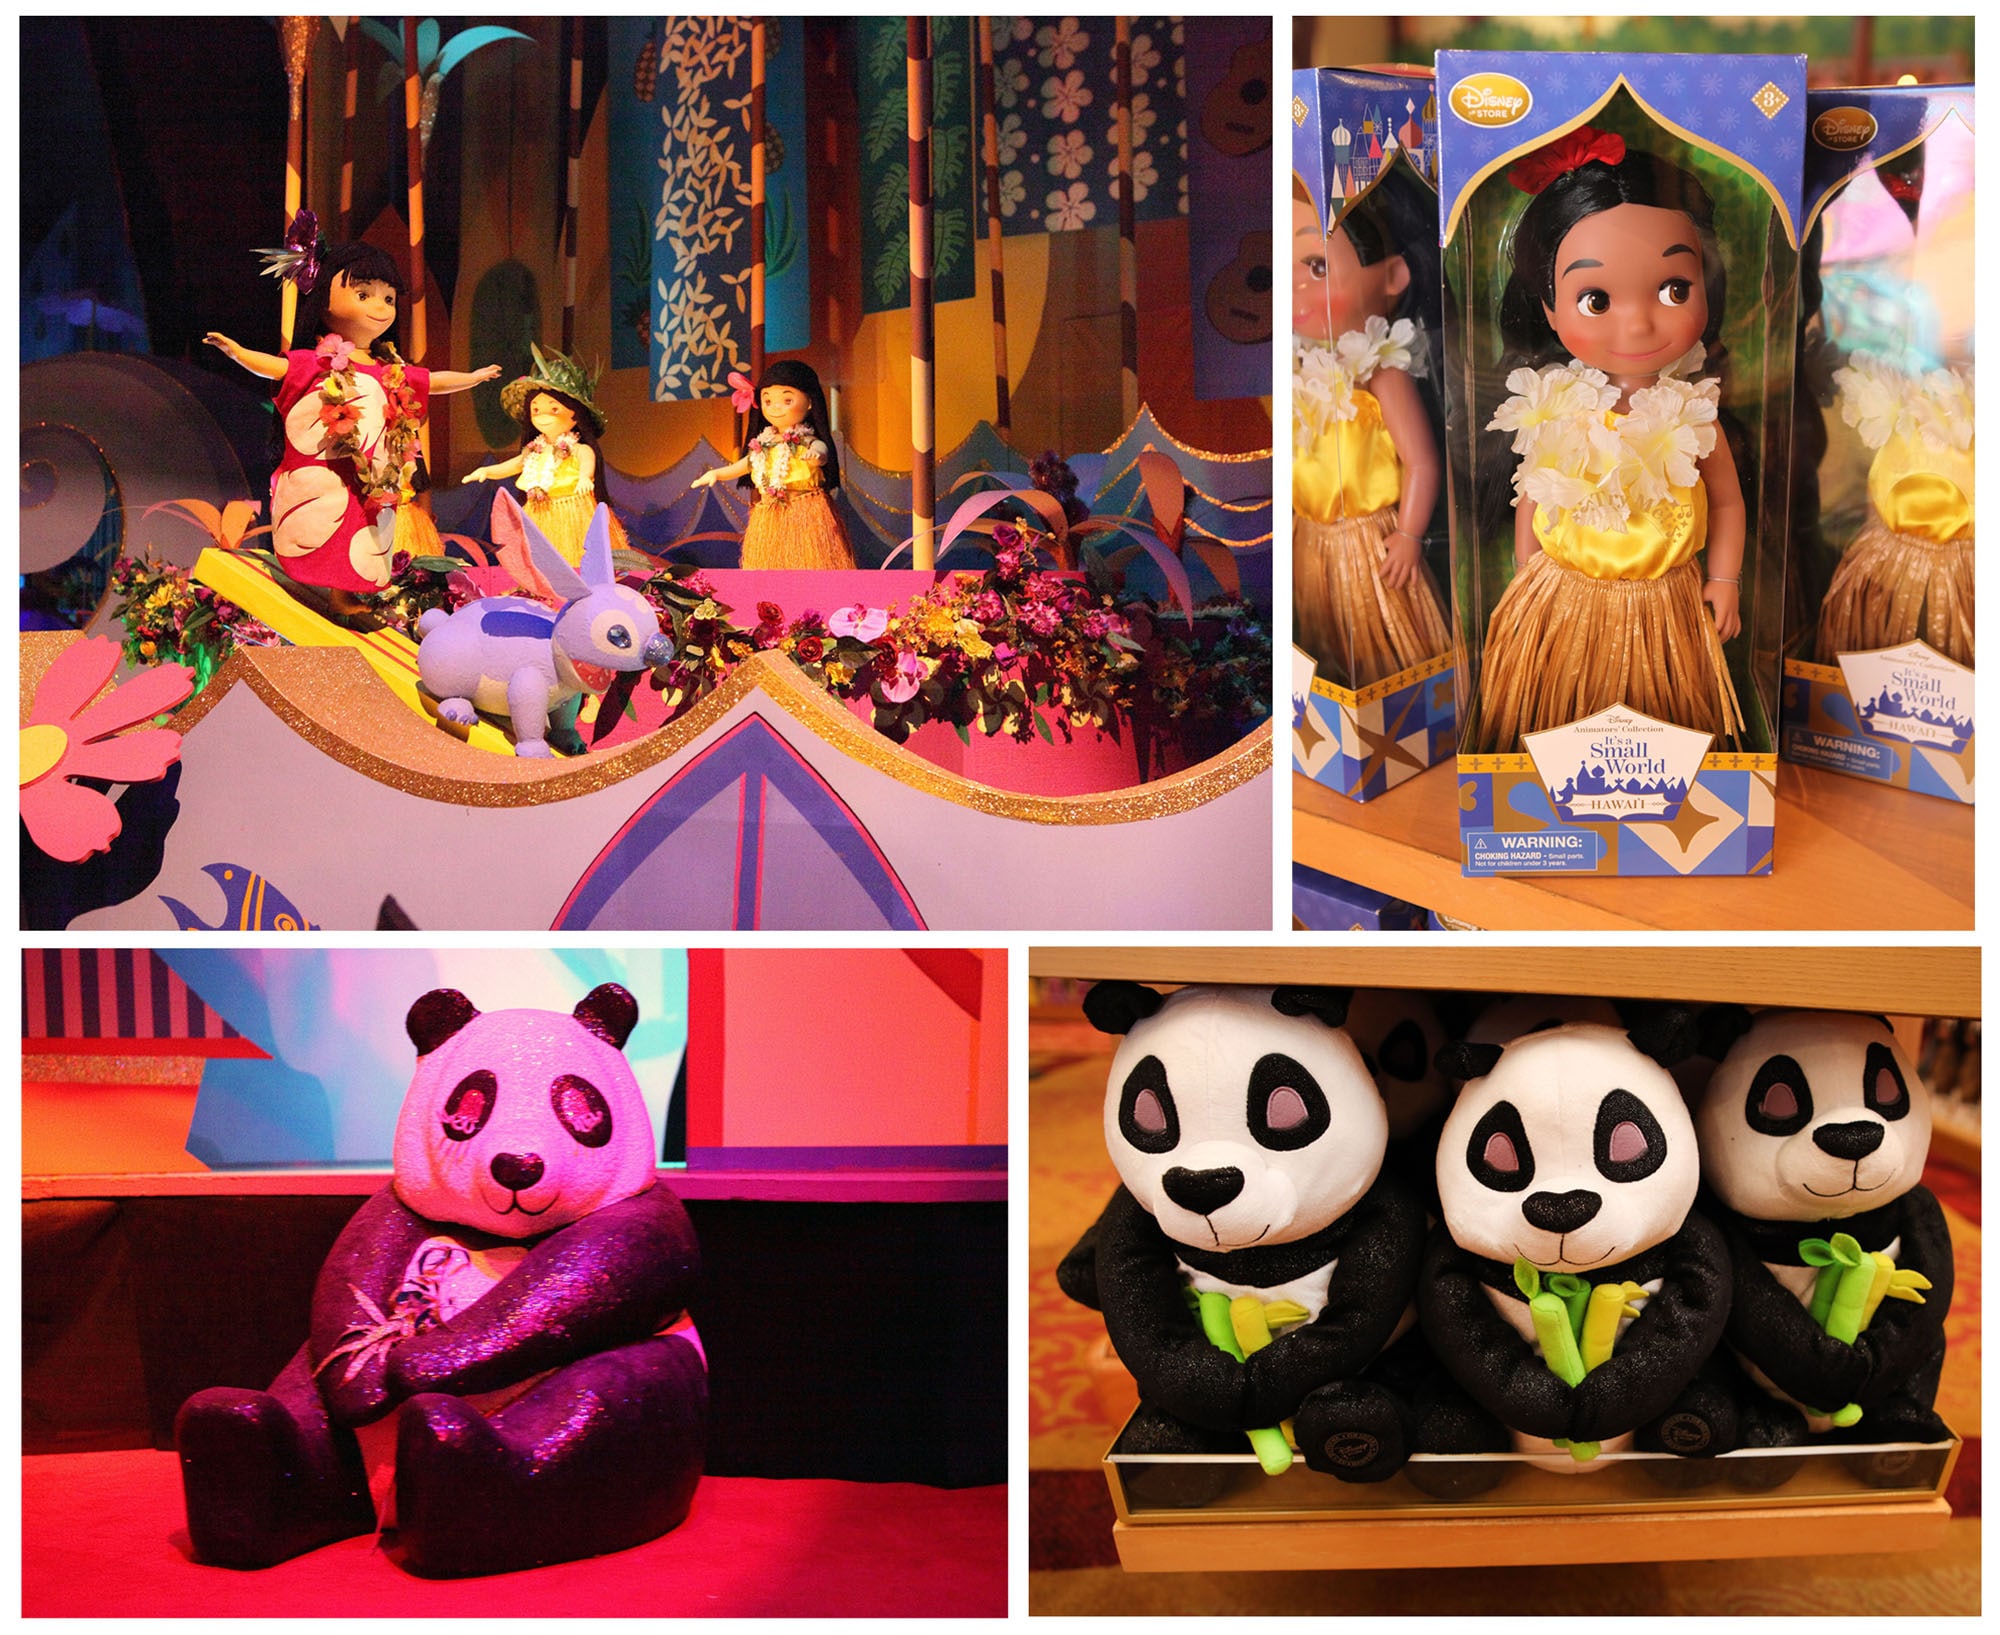 Dolls And Plush Celebrating The Happiest Disney Attraction Ever To Set Sail Now At Disney Parks Disney Parks Blog